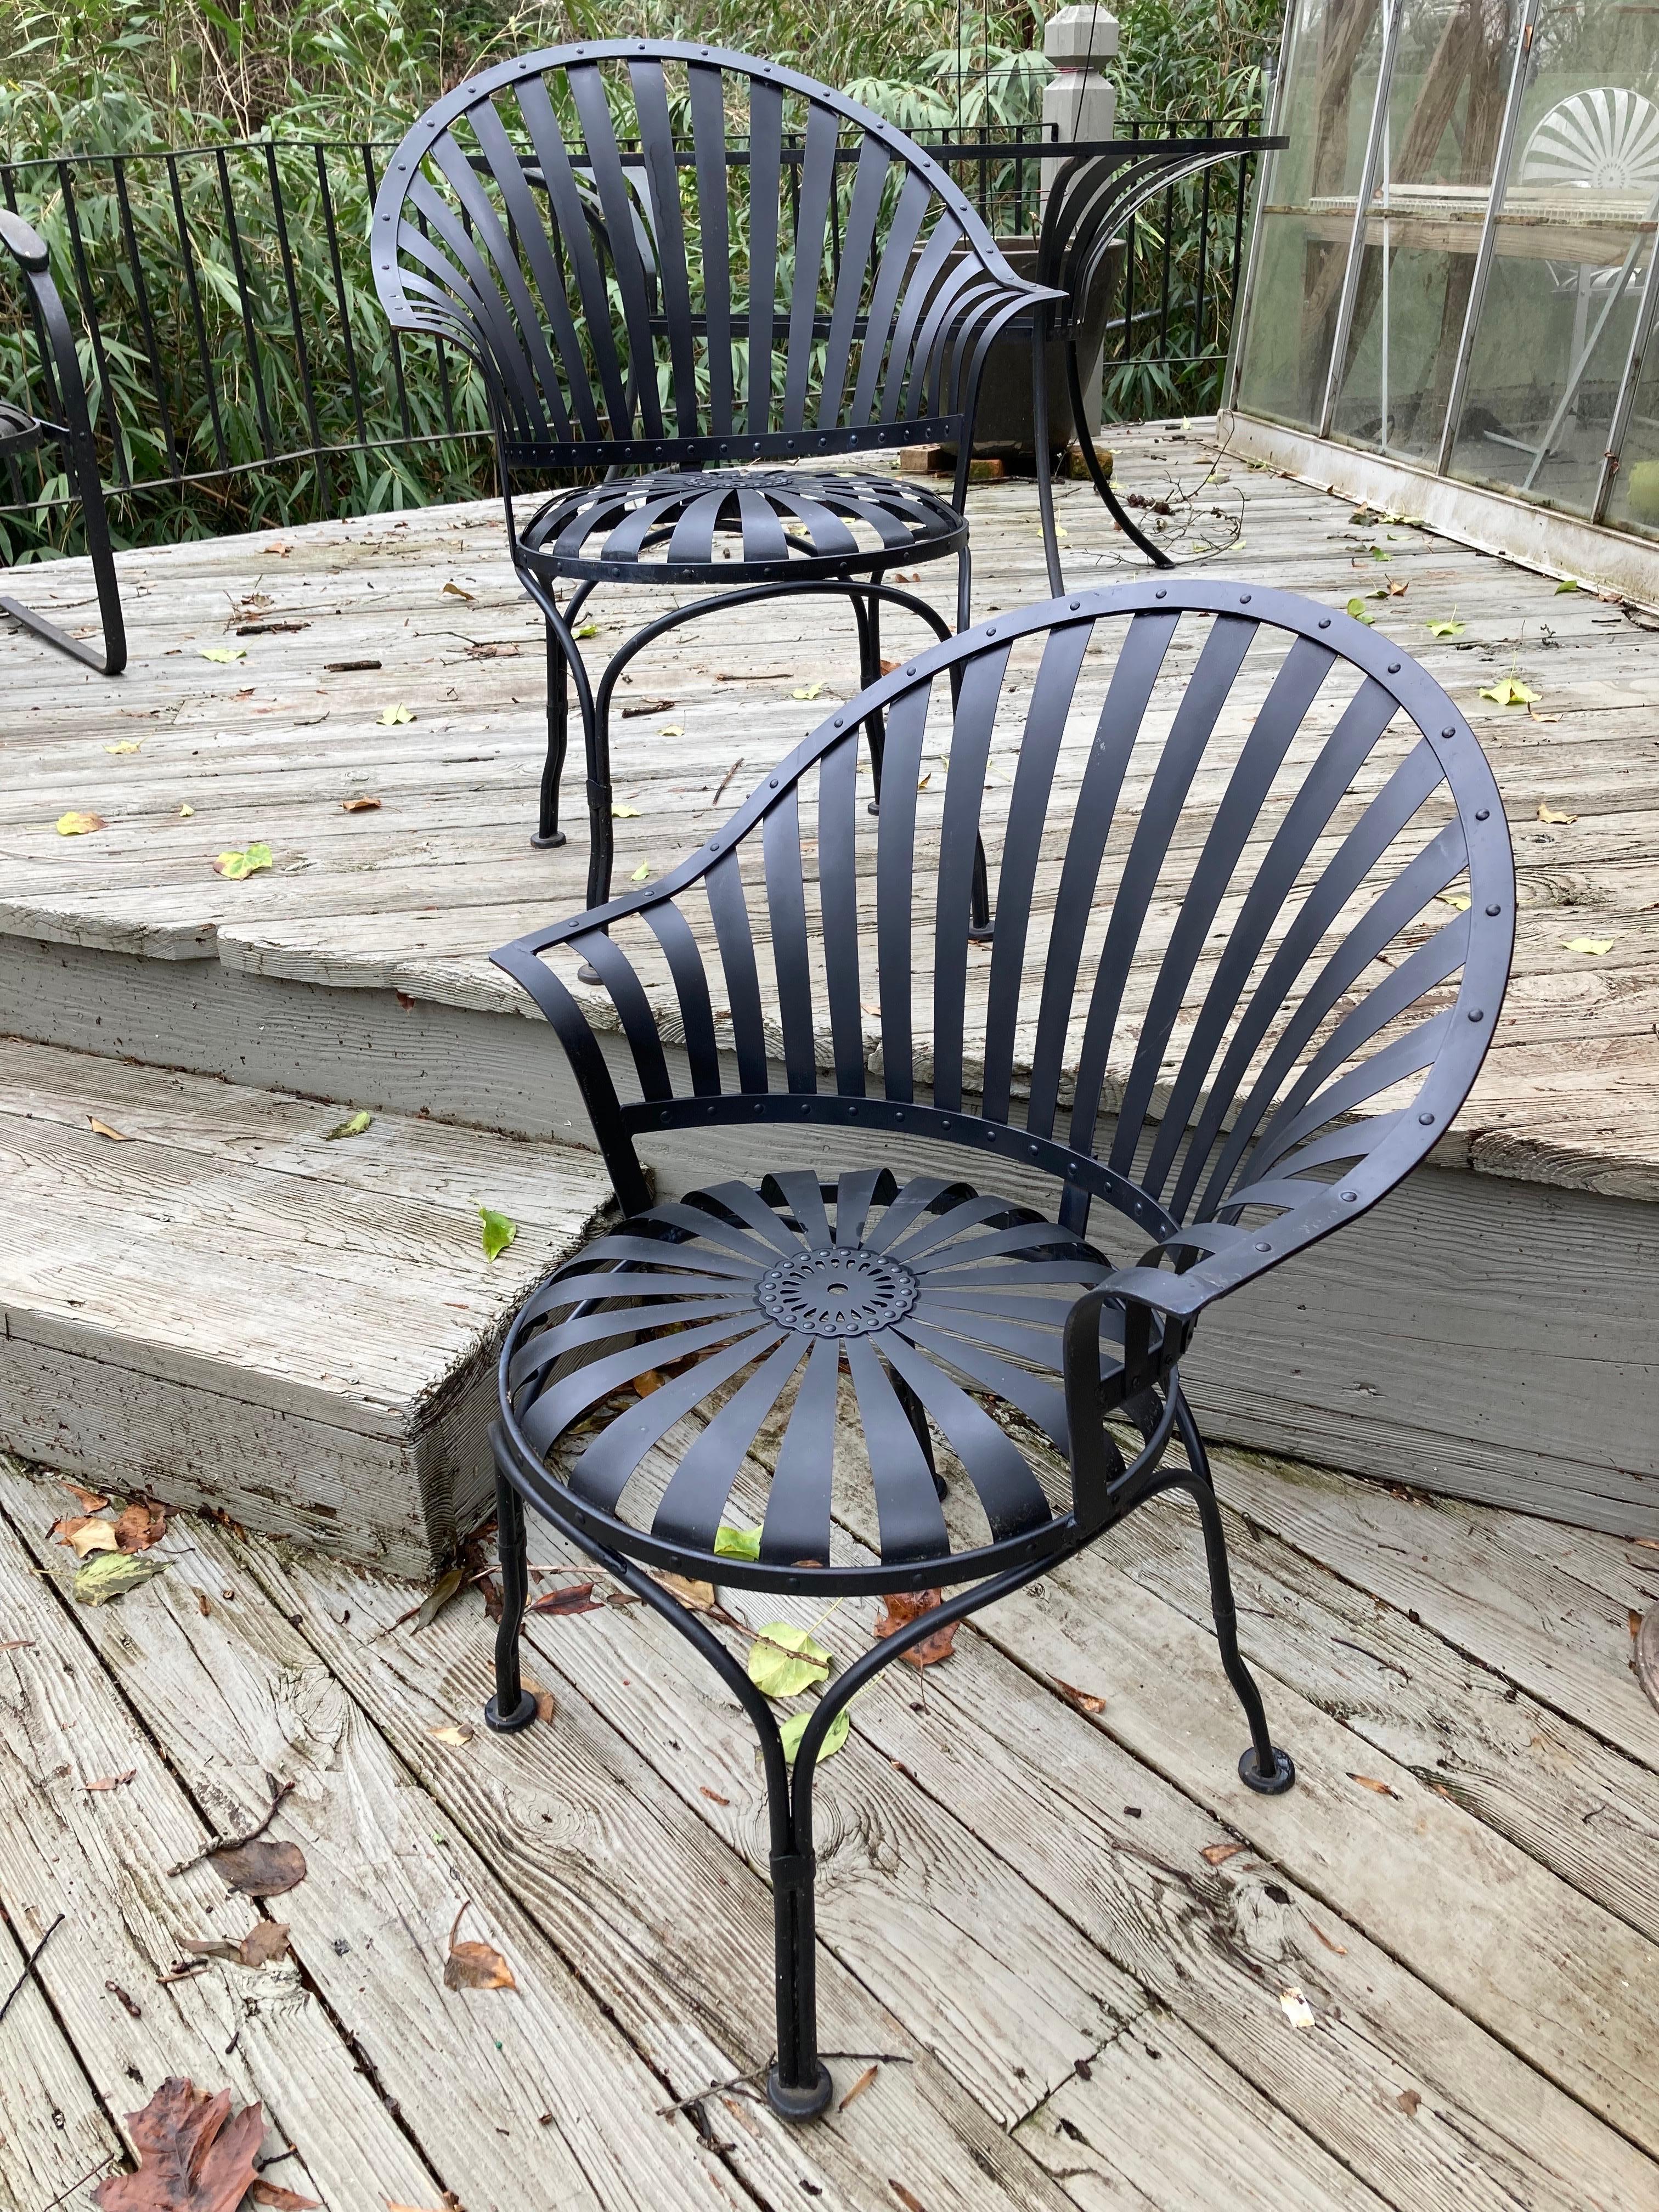 20th Century francois carre fan-back iron garden chairs - a pair